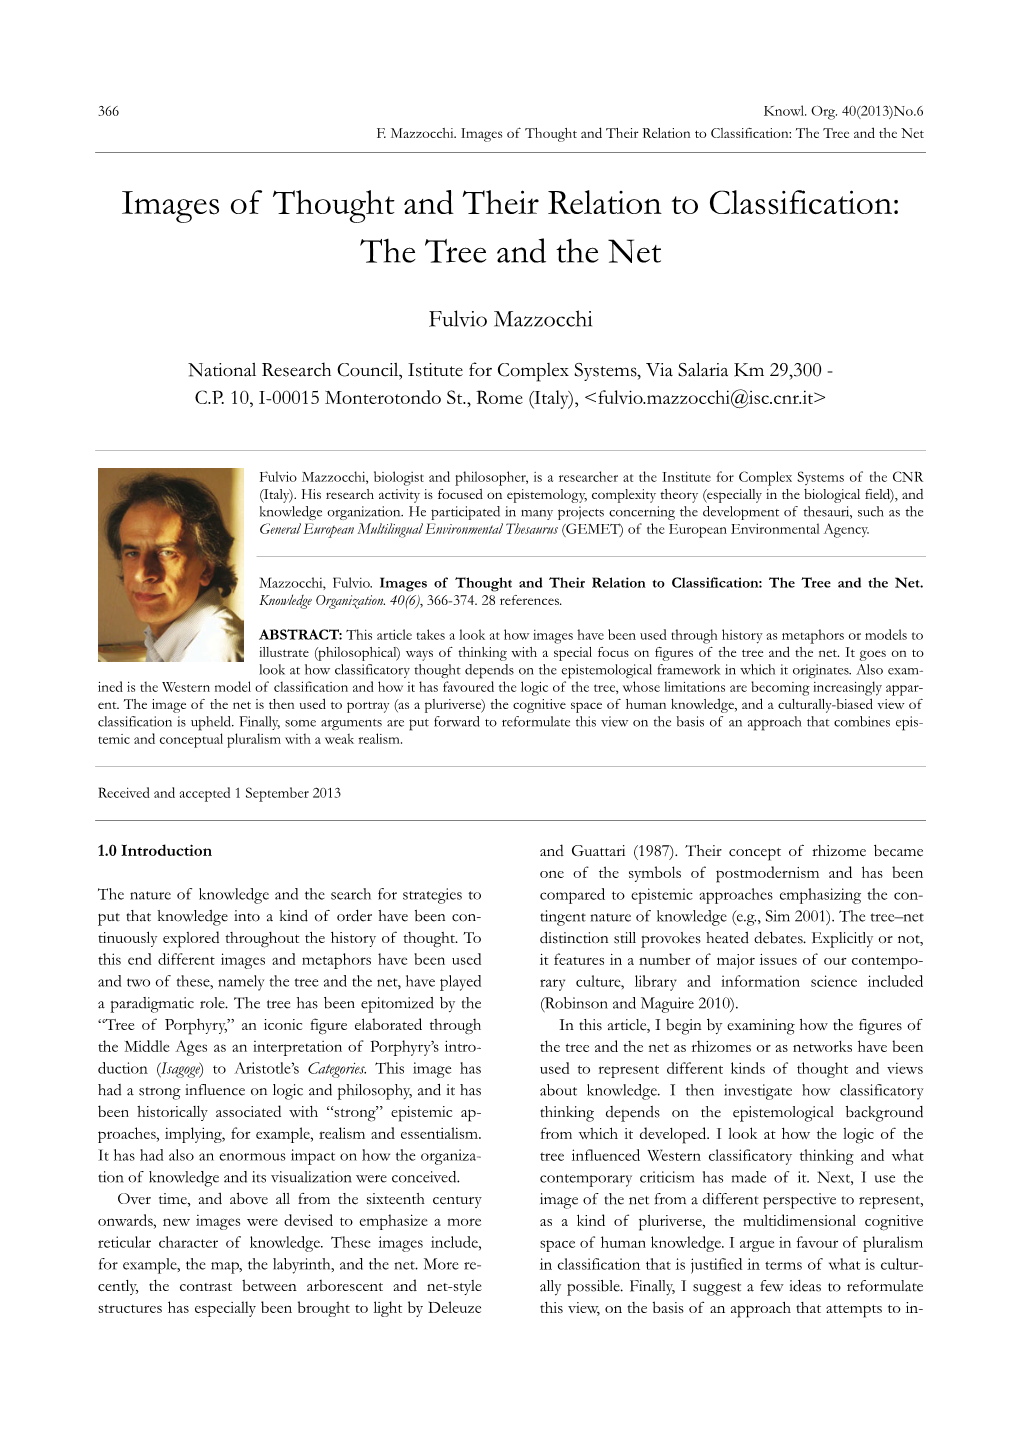 Images of Thought and Their Relation to Classification: the Tree and the Net